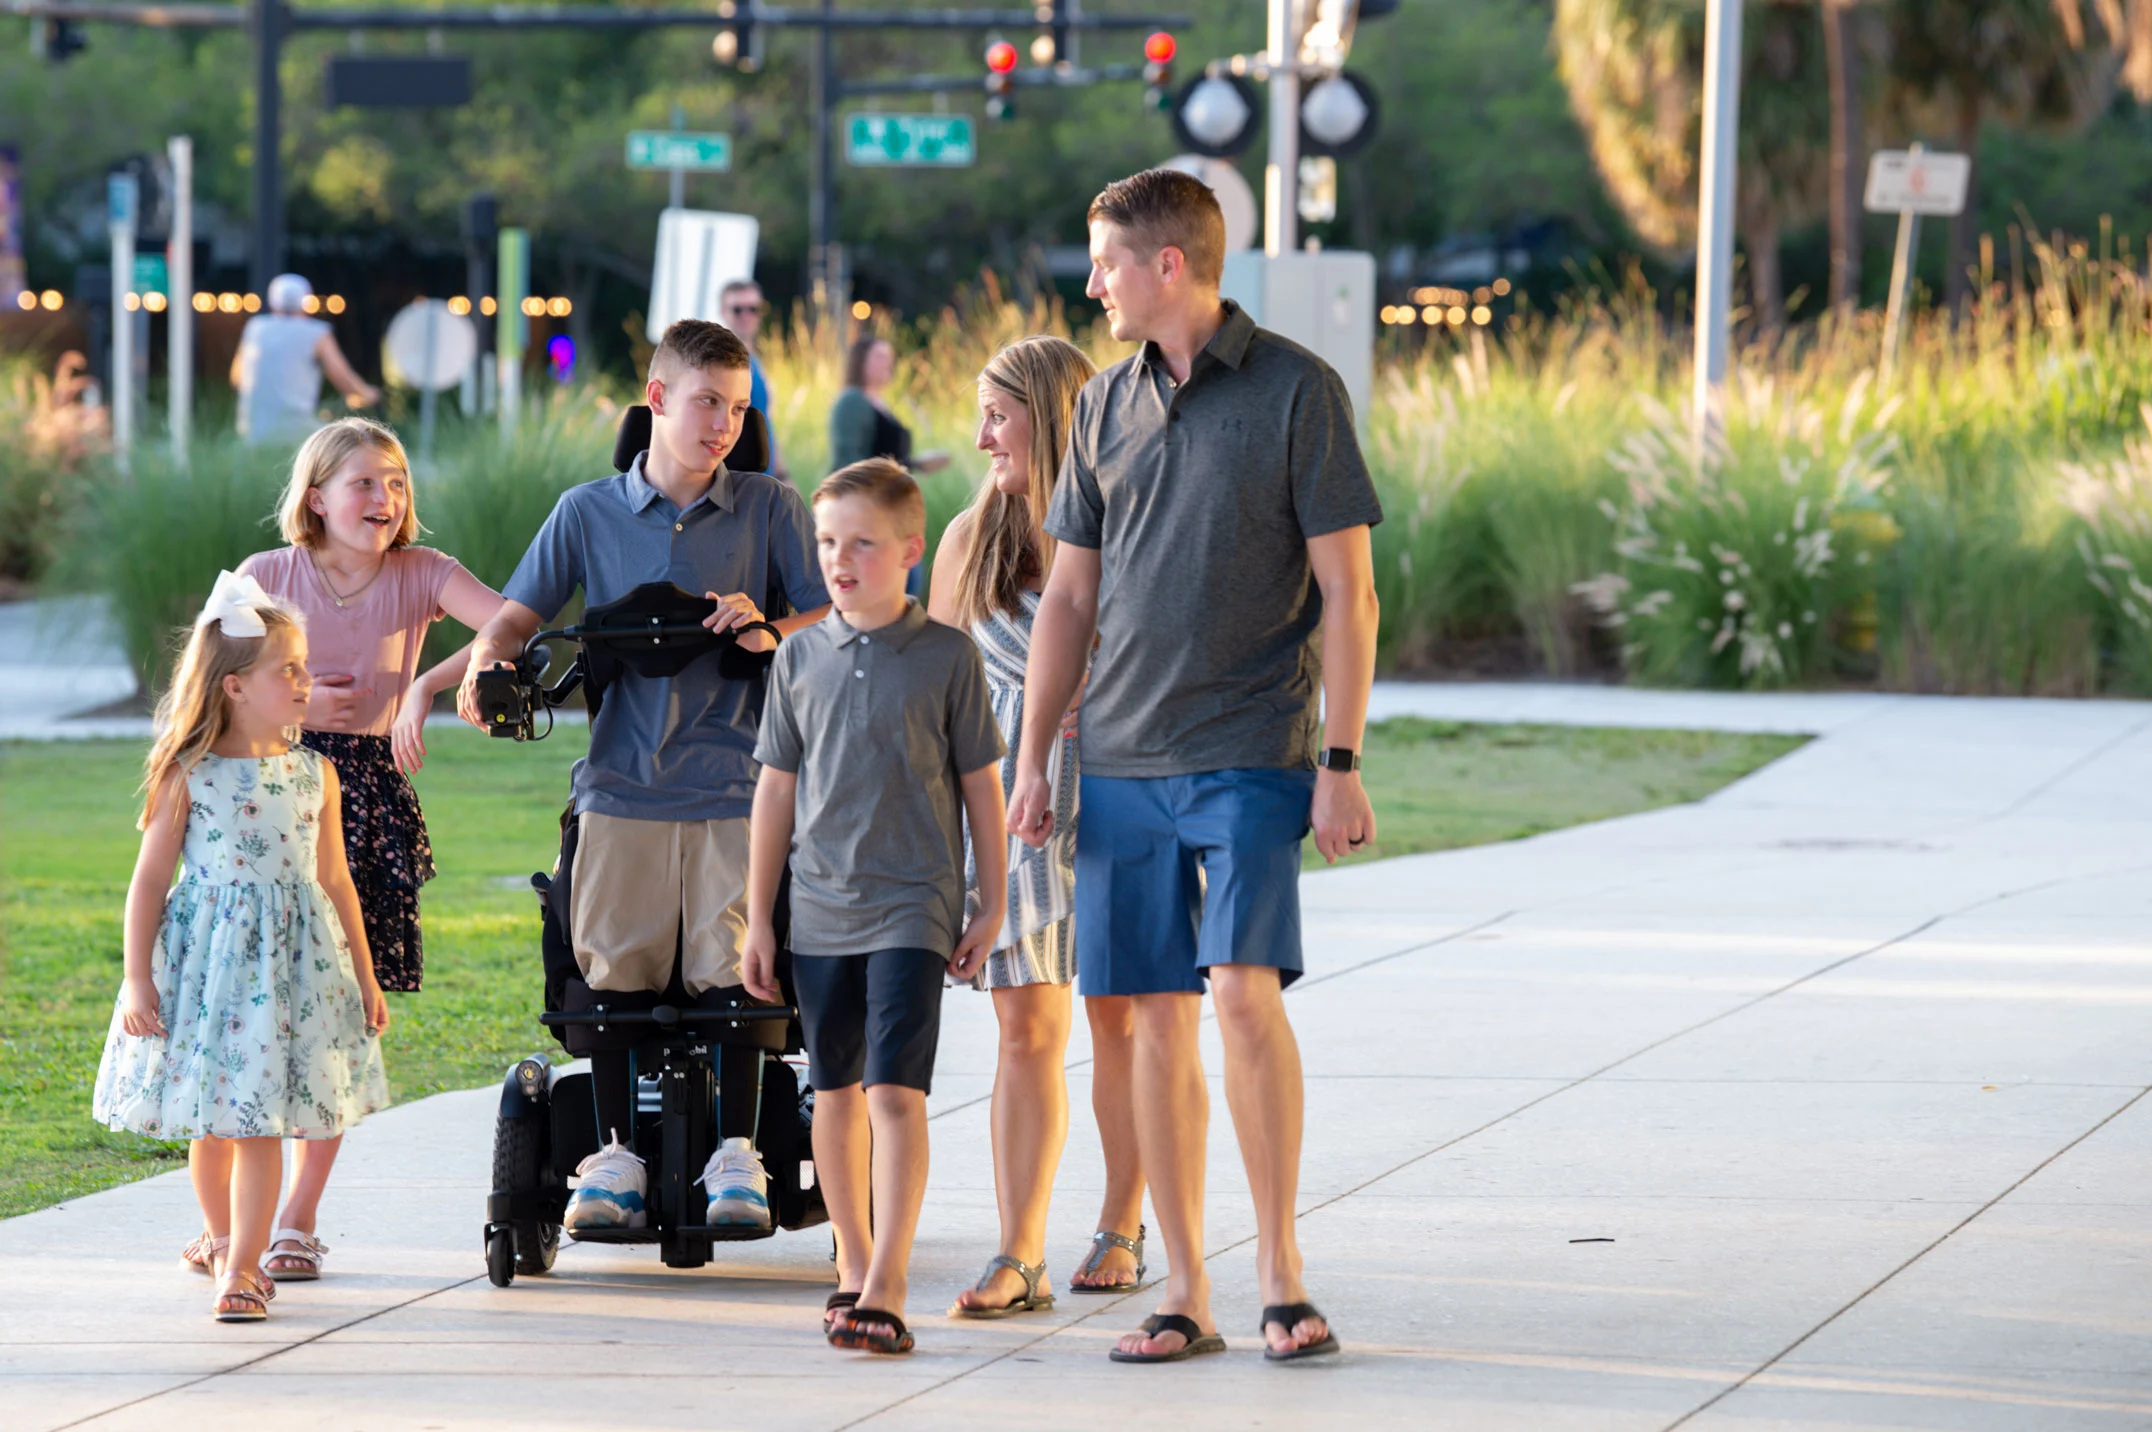 Landon, a young Caucasian man, uses his Permobil F5 VS standing wheelchair while rolling with his family in a park. They are on a cement pathway with tall grass and a street scene in the background. His family are looking at him and smiling.